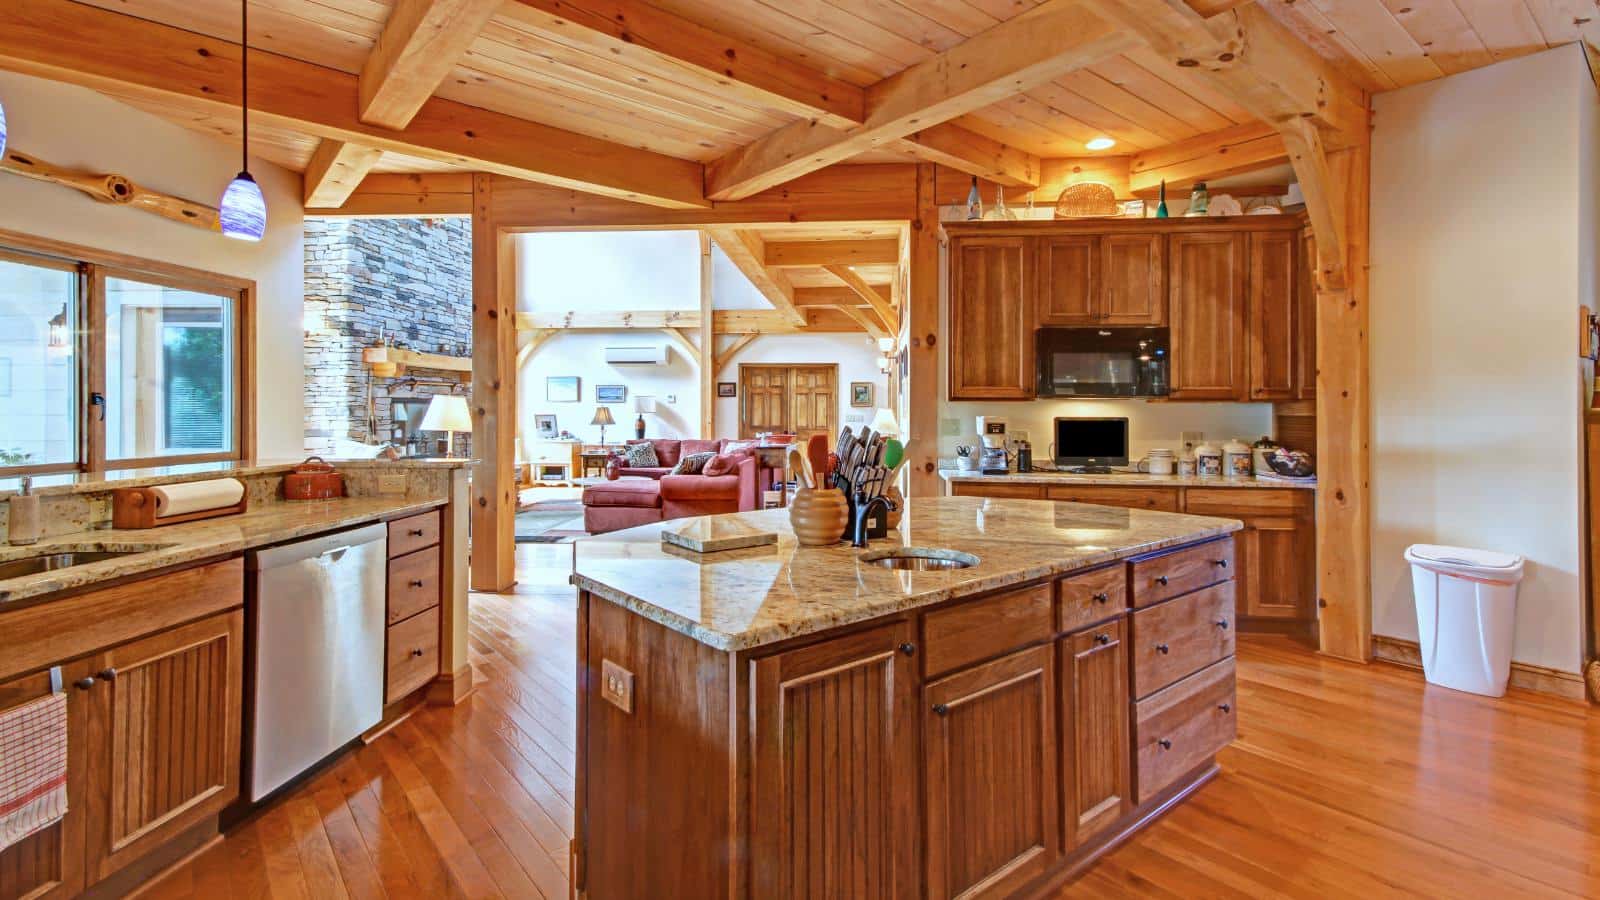 Large kitchen with wooden cabinets, marble countertops, white walls, wooden ceiling, and view into great room